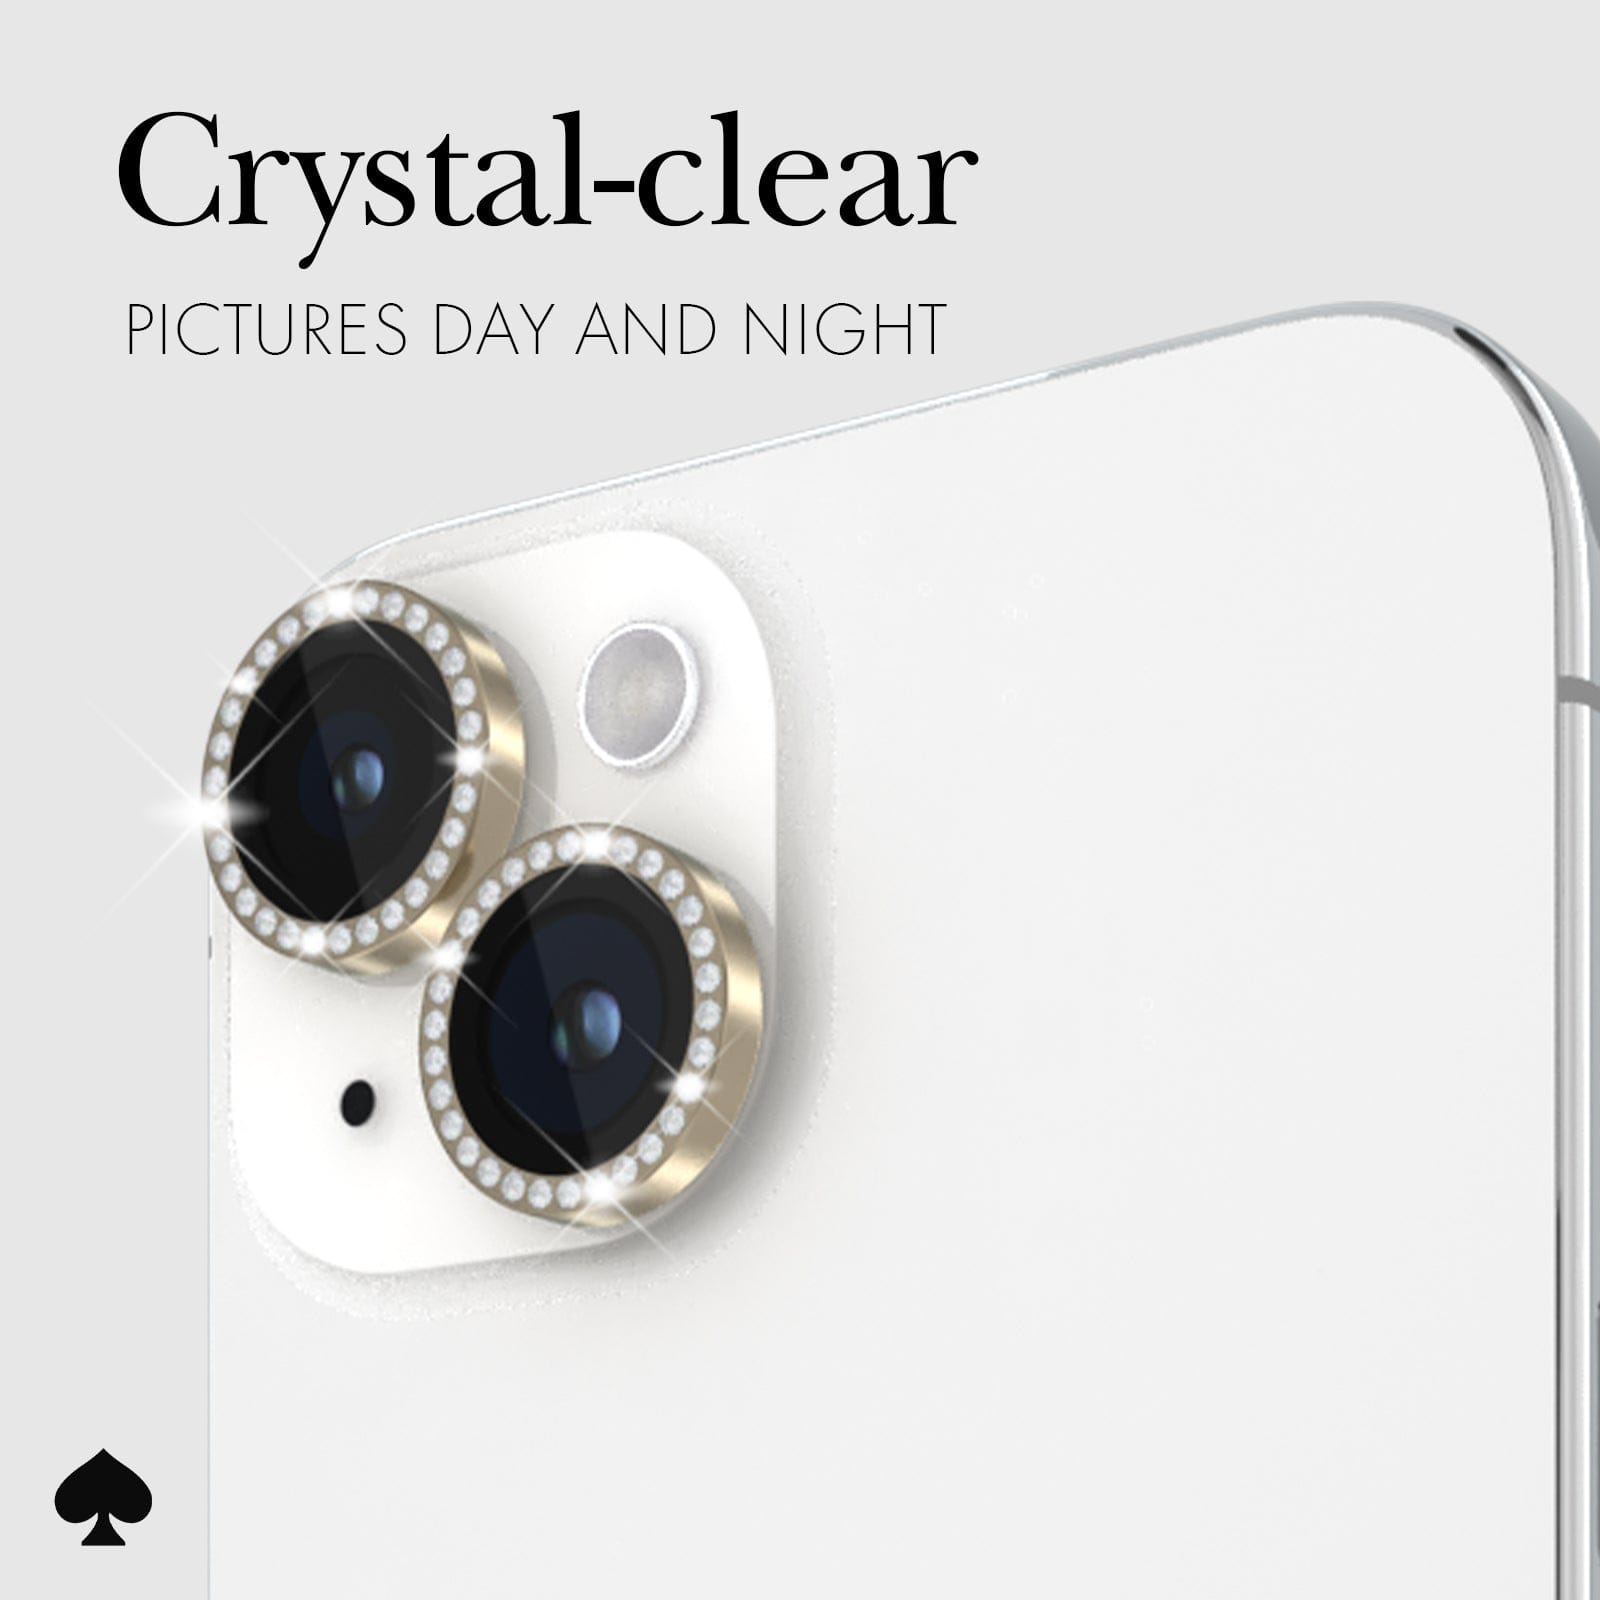 CRYSTAL-CLEAR PICTURES DAY AND NIGHT